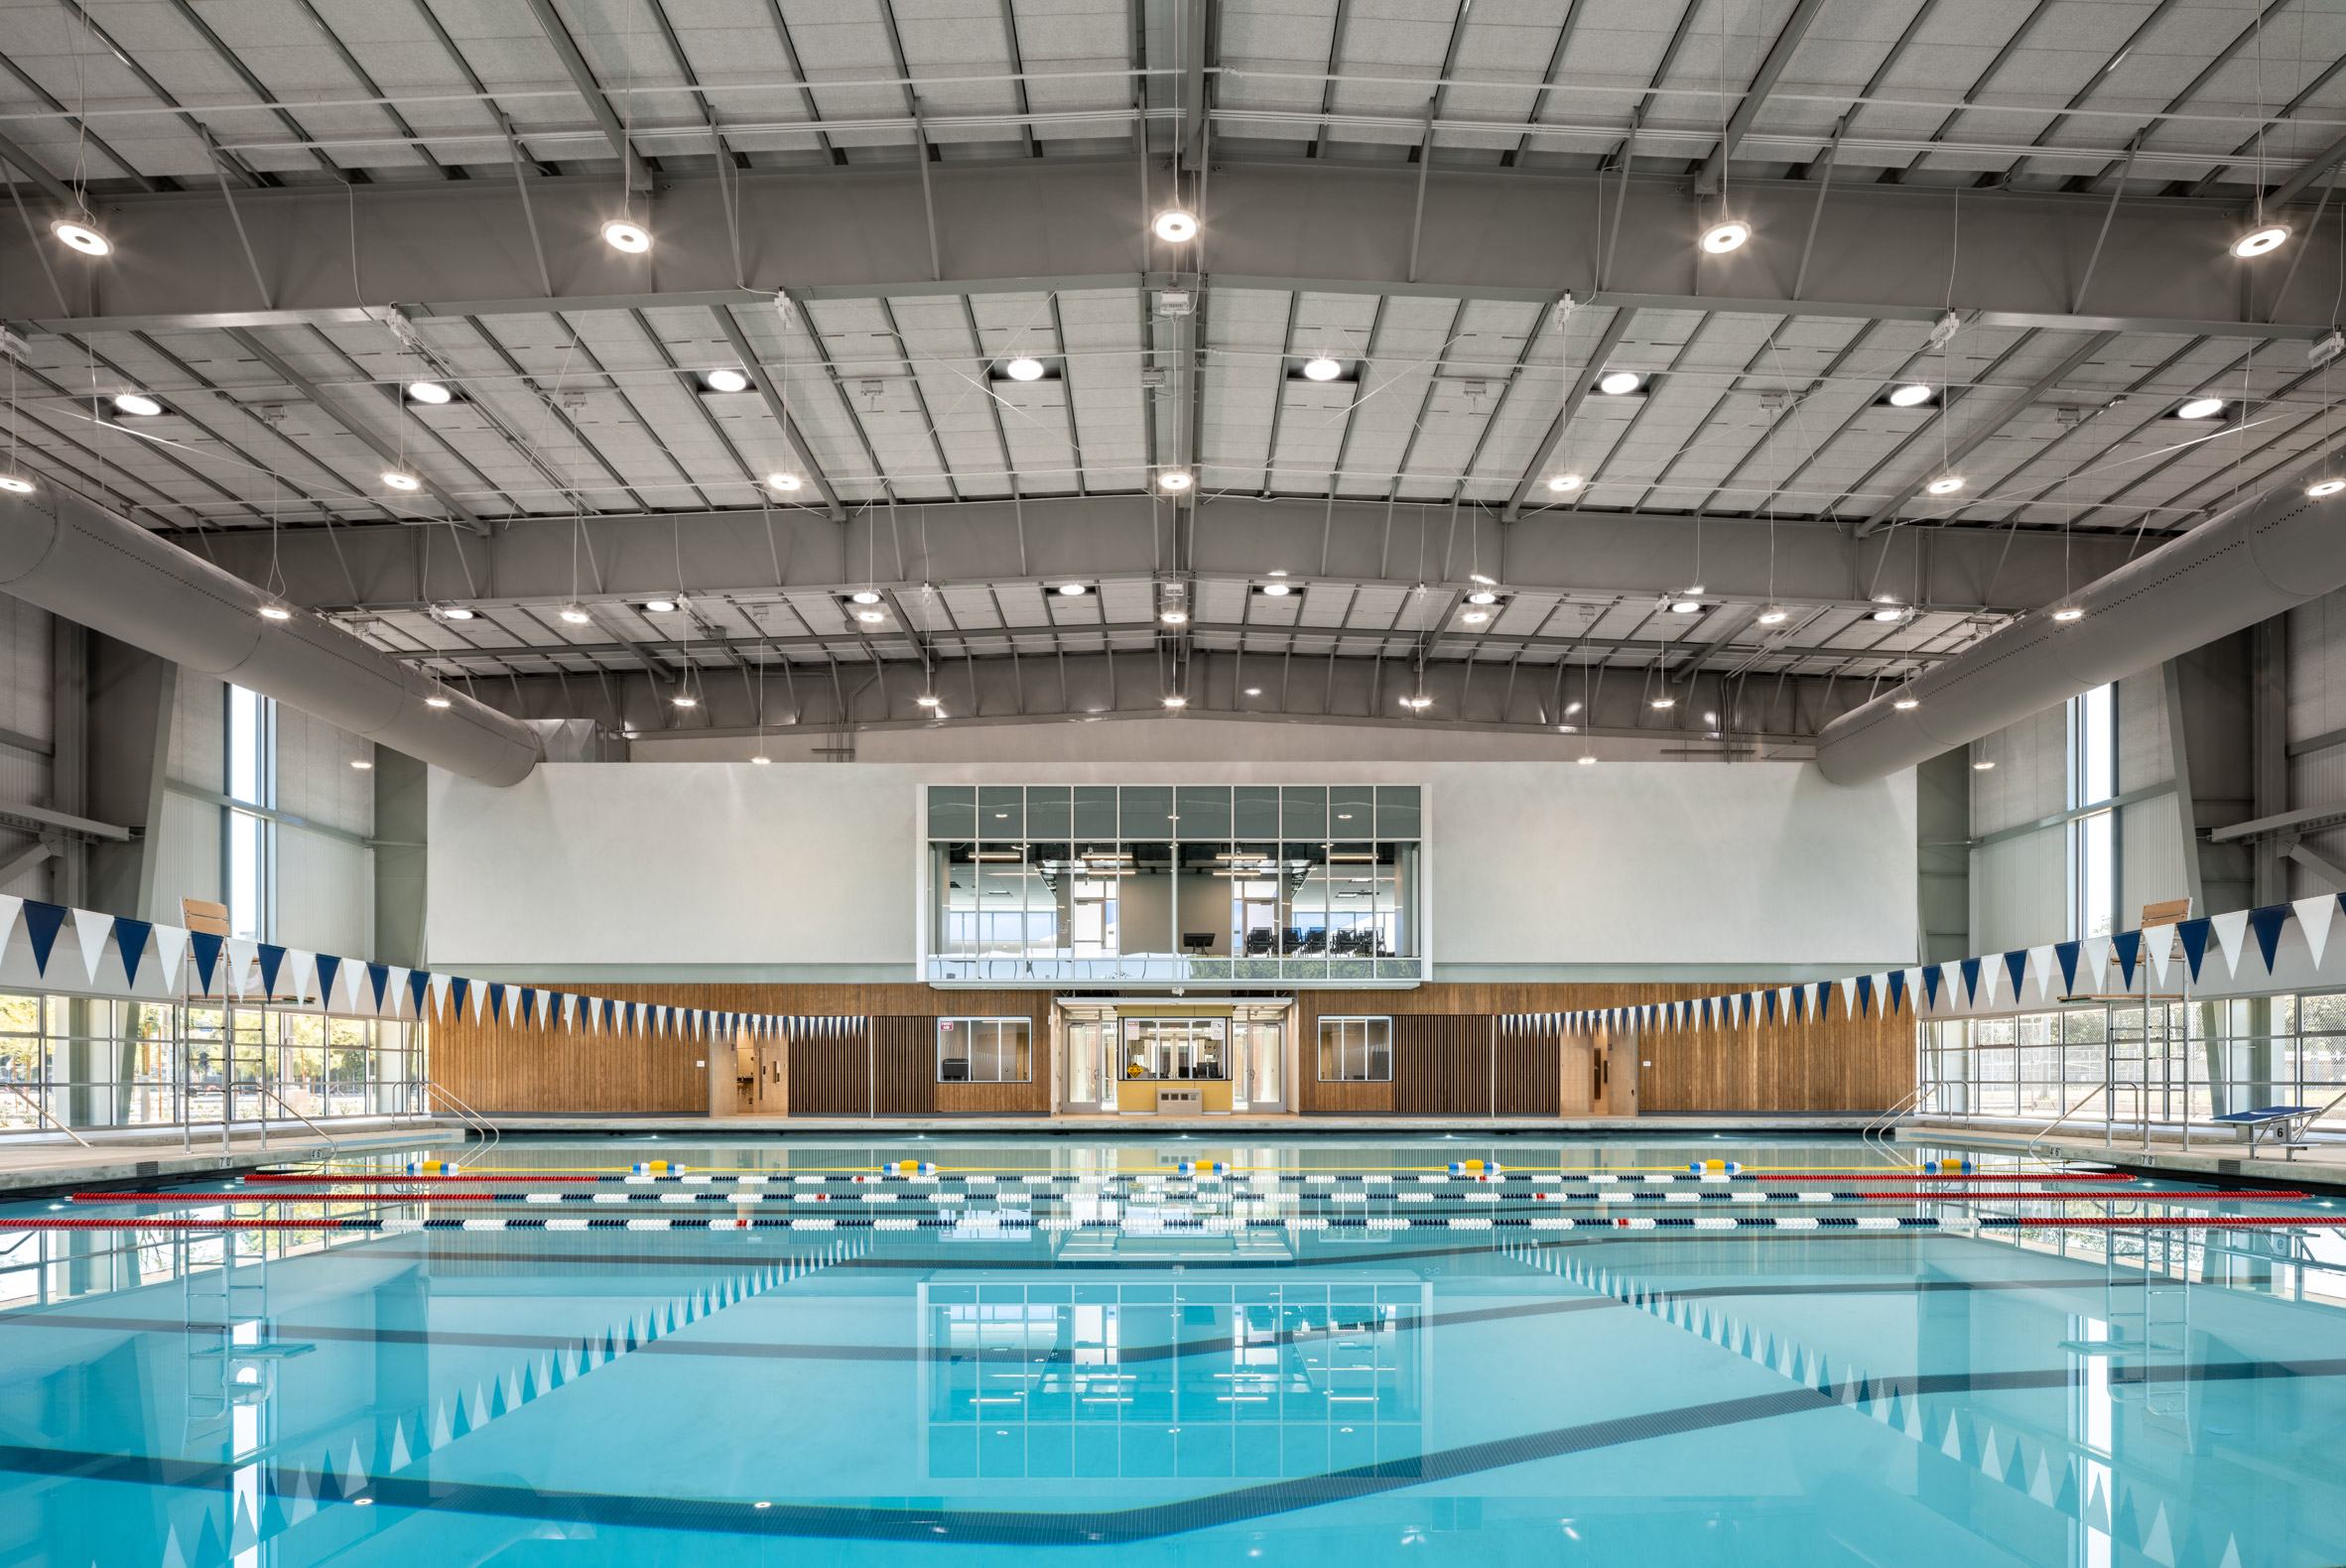 Swimming pool in the building designed with skylights